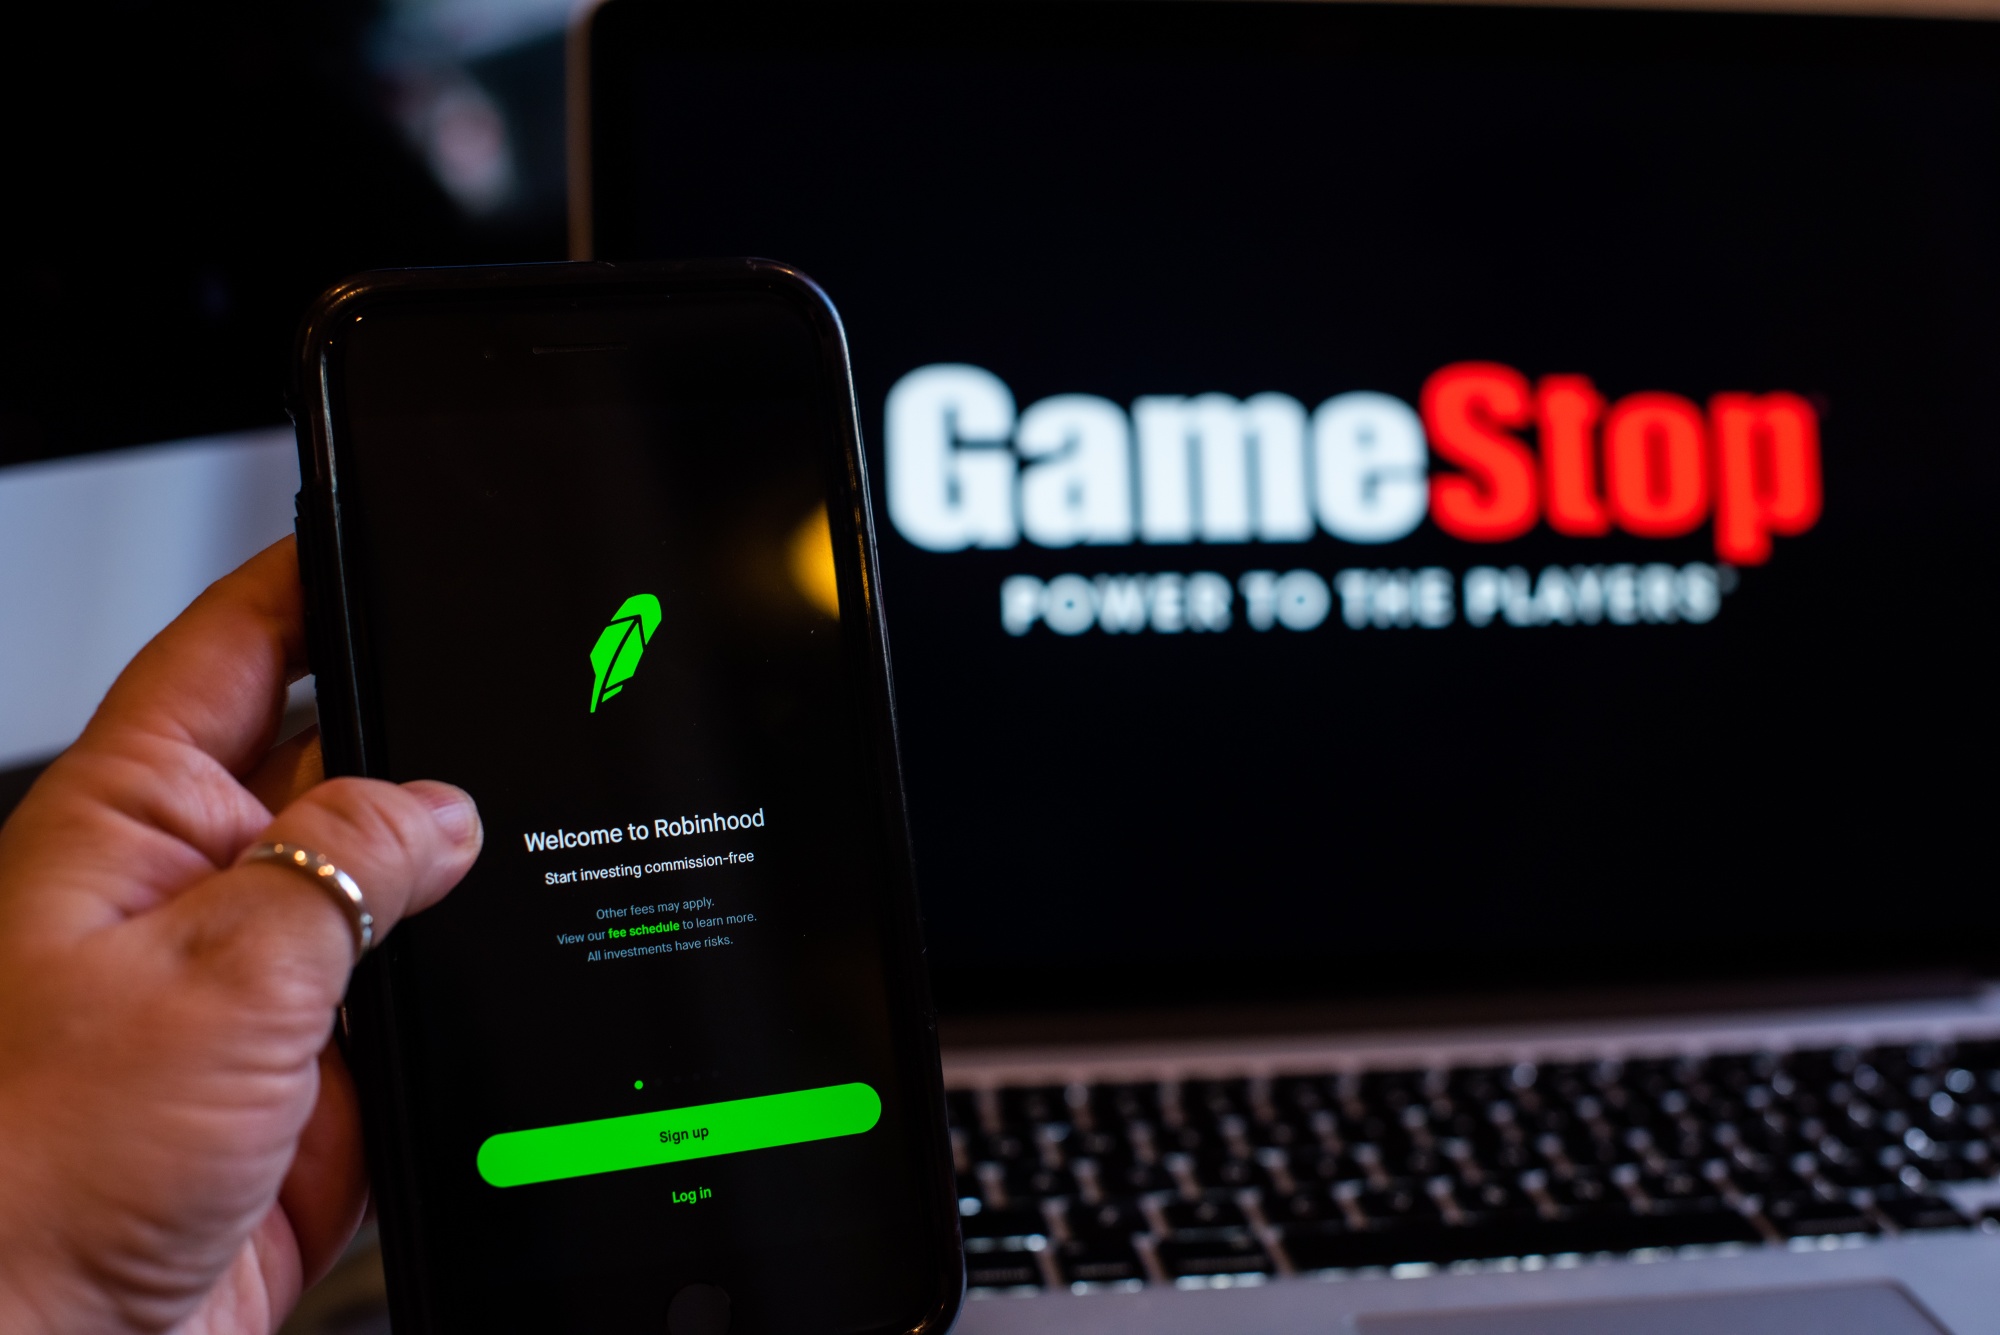 The GameStop Corp. logo on a laptop computer and Robinhood application on a smartphone arranged in Hastings-On-Hudson, New York, U.S., on Friday, Jan. 29, 2021. GameStop Corp. advanced on Friday and was on track to recoup much of Thursday’s $11 billion blow after Robinhood Markets Inc. and other brokerages eased trading restrictions on the video-game retailer.